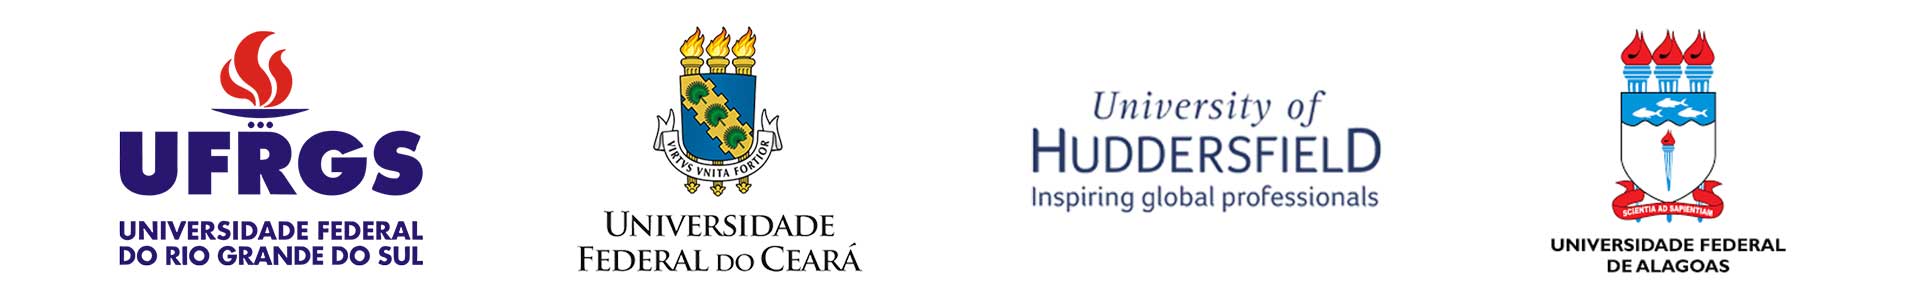 Logos of the Federal University of Ceará (UFC), Federal University of Alagoas (UFAL) and the Federal University of Rio Grande do Sul (UFRGS), from Brazil, and the University of Huddersfield, U.K